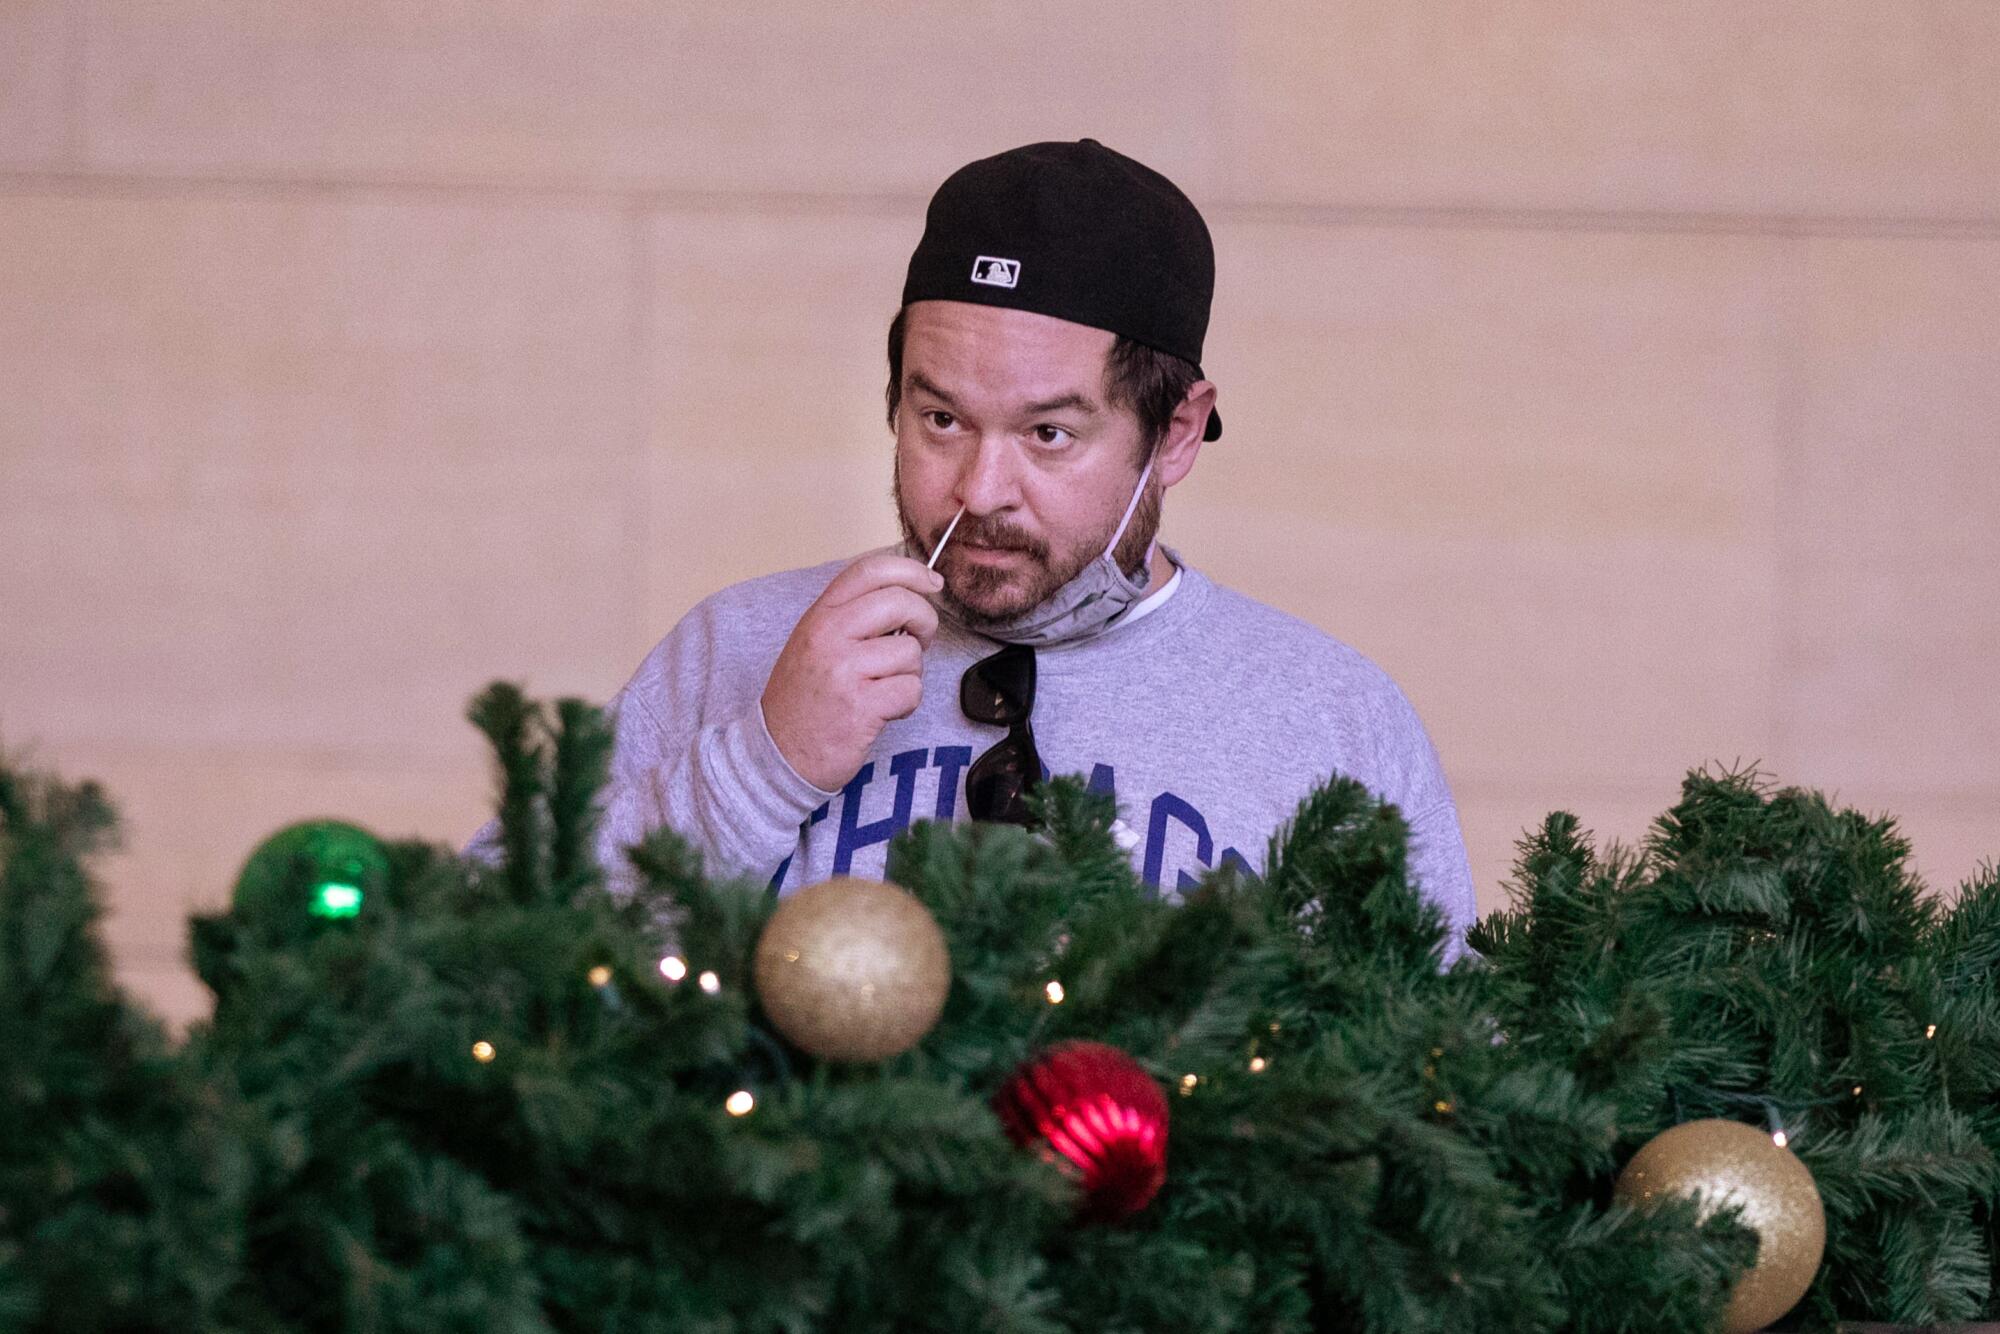 A man swabs his nose near Christmas decorations.